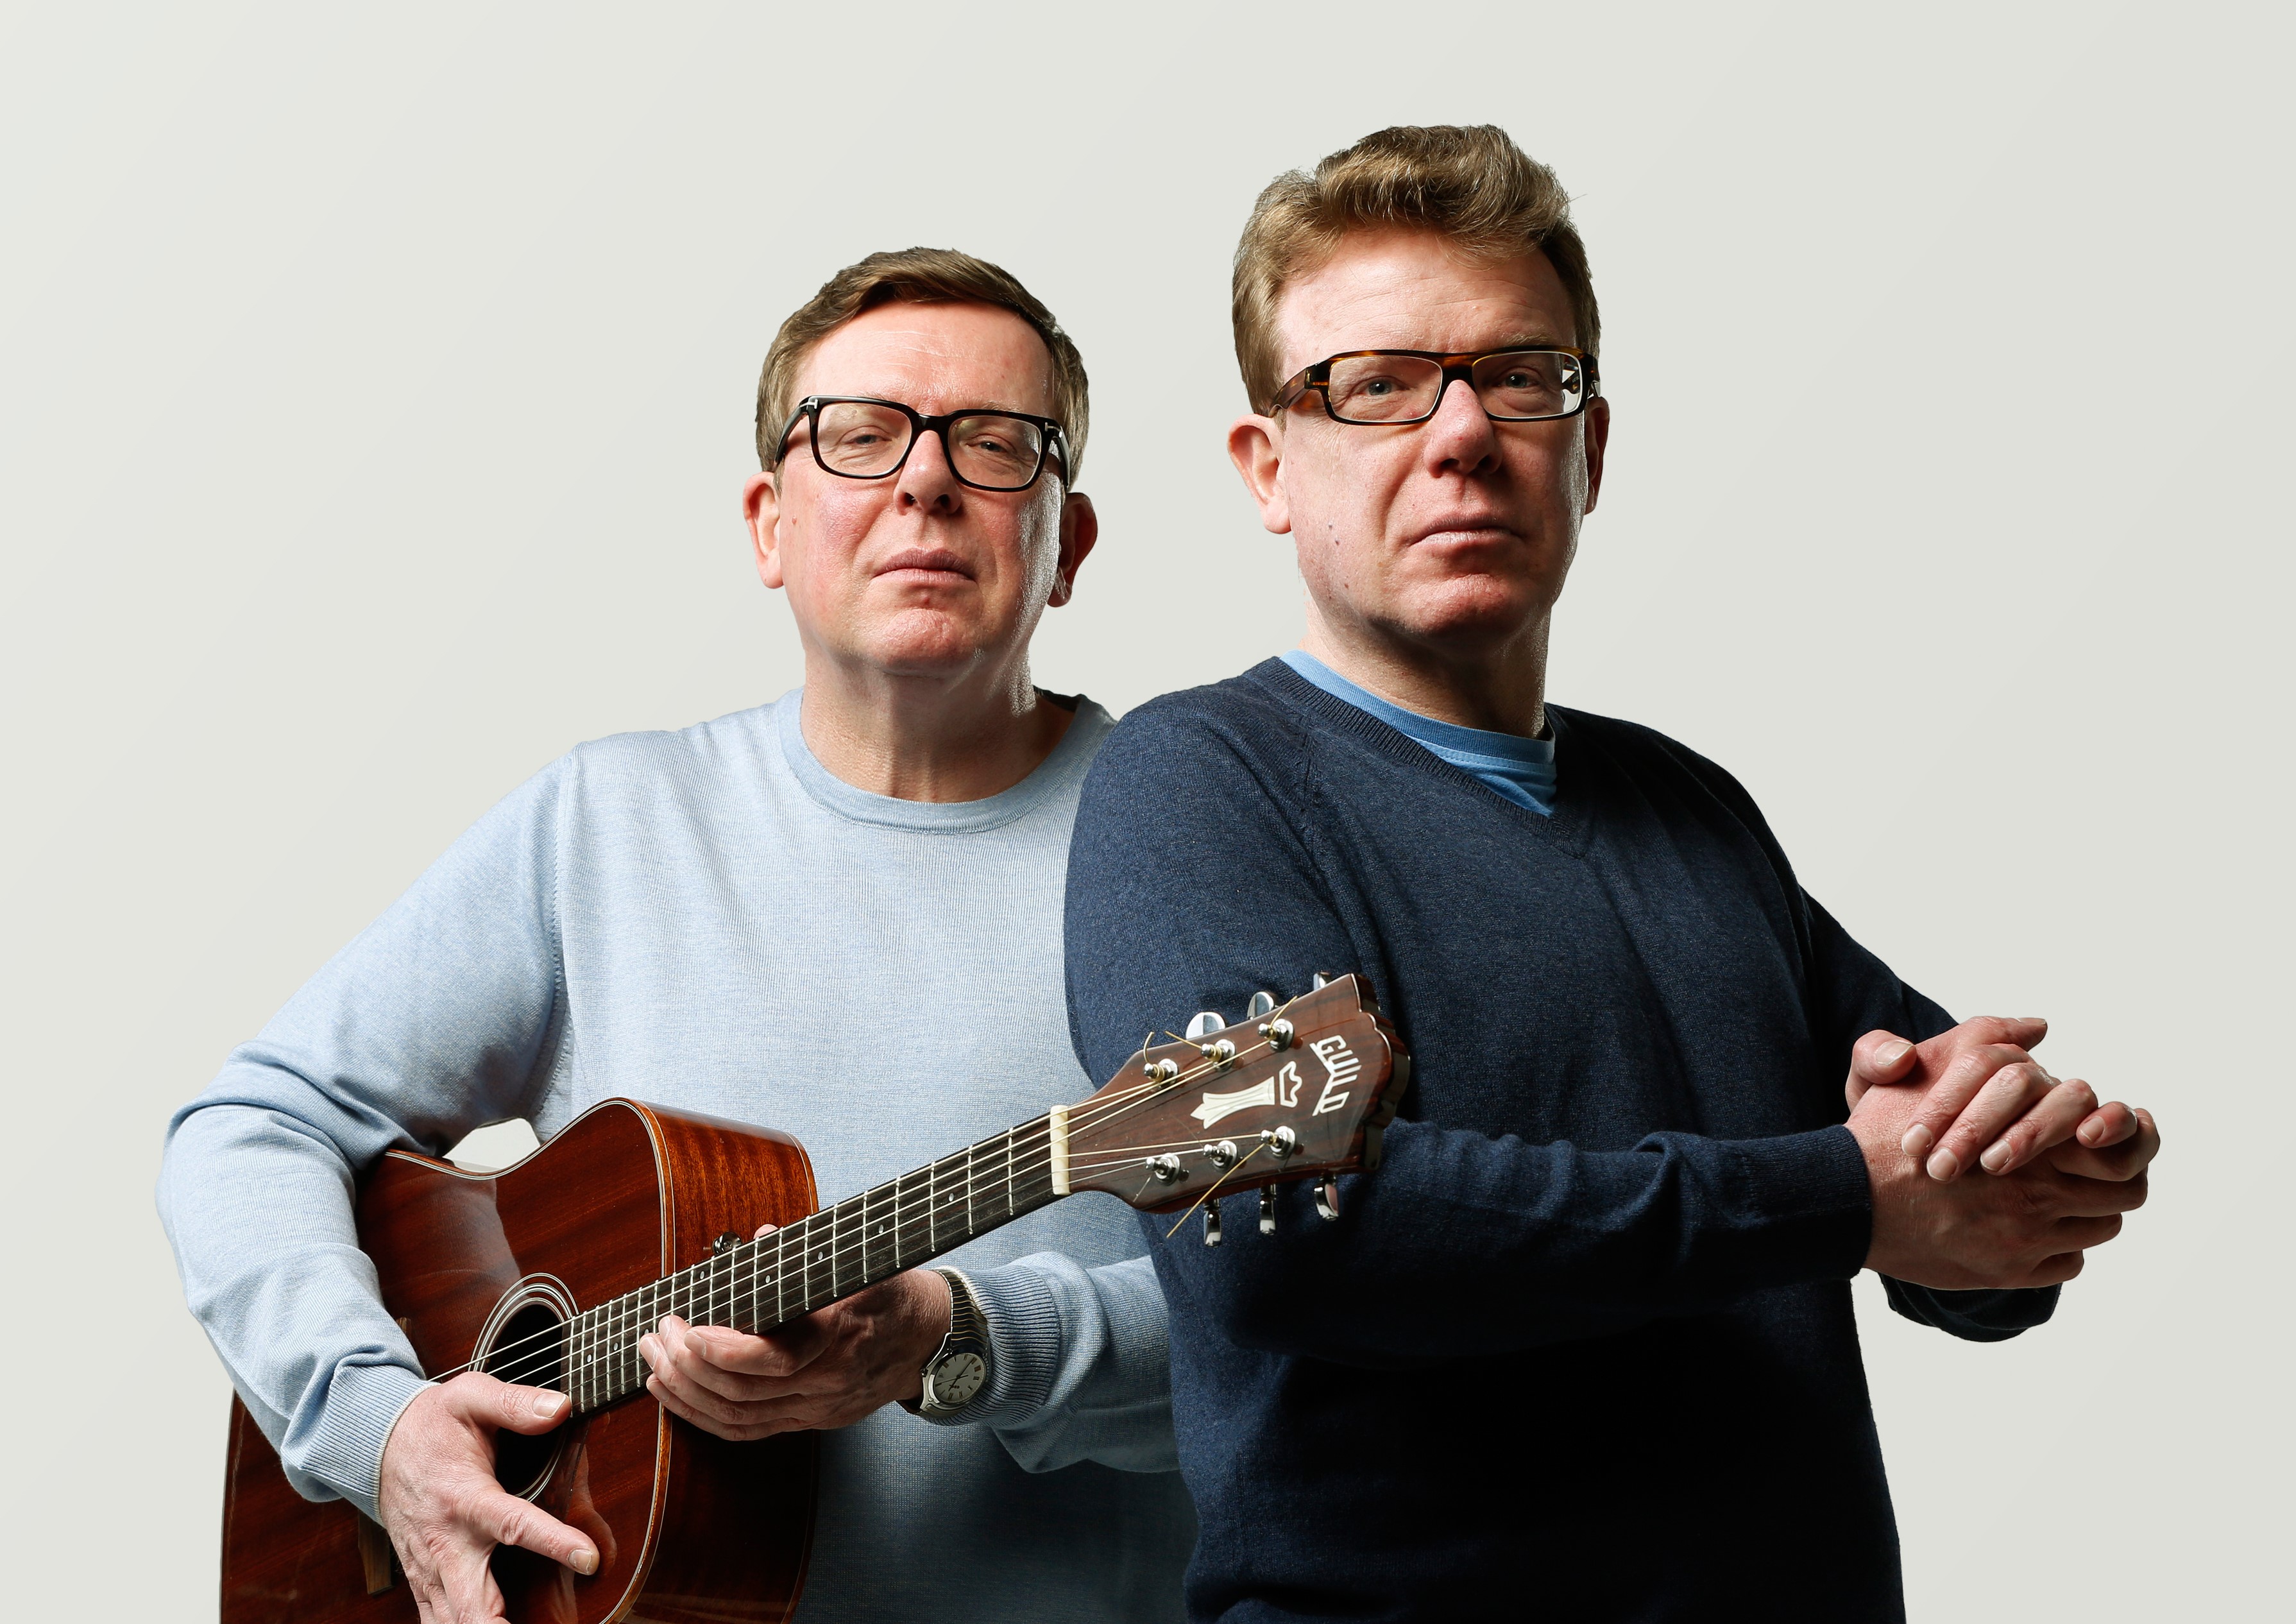 The bridge will be closed to allow The Proclaimers to perform in Inverness.